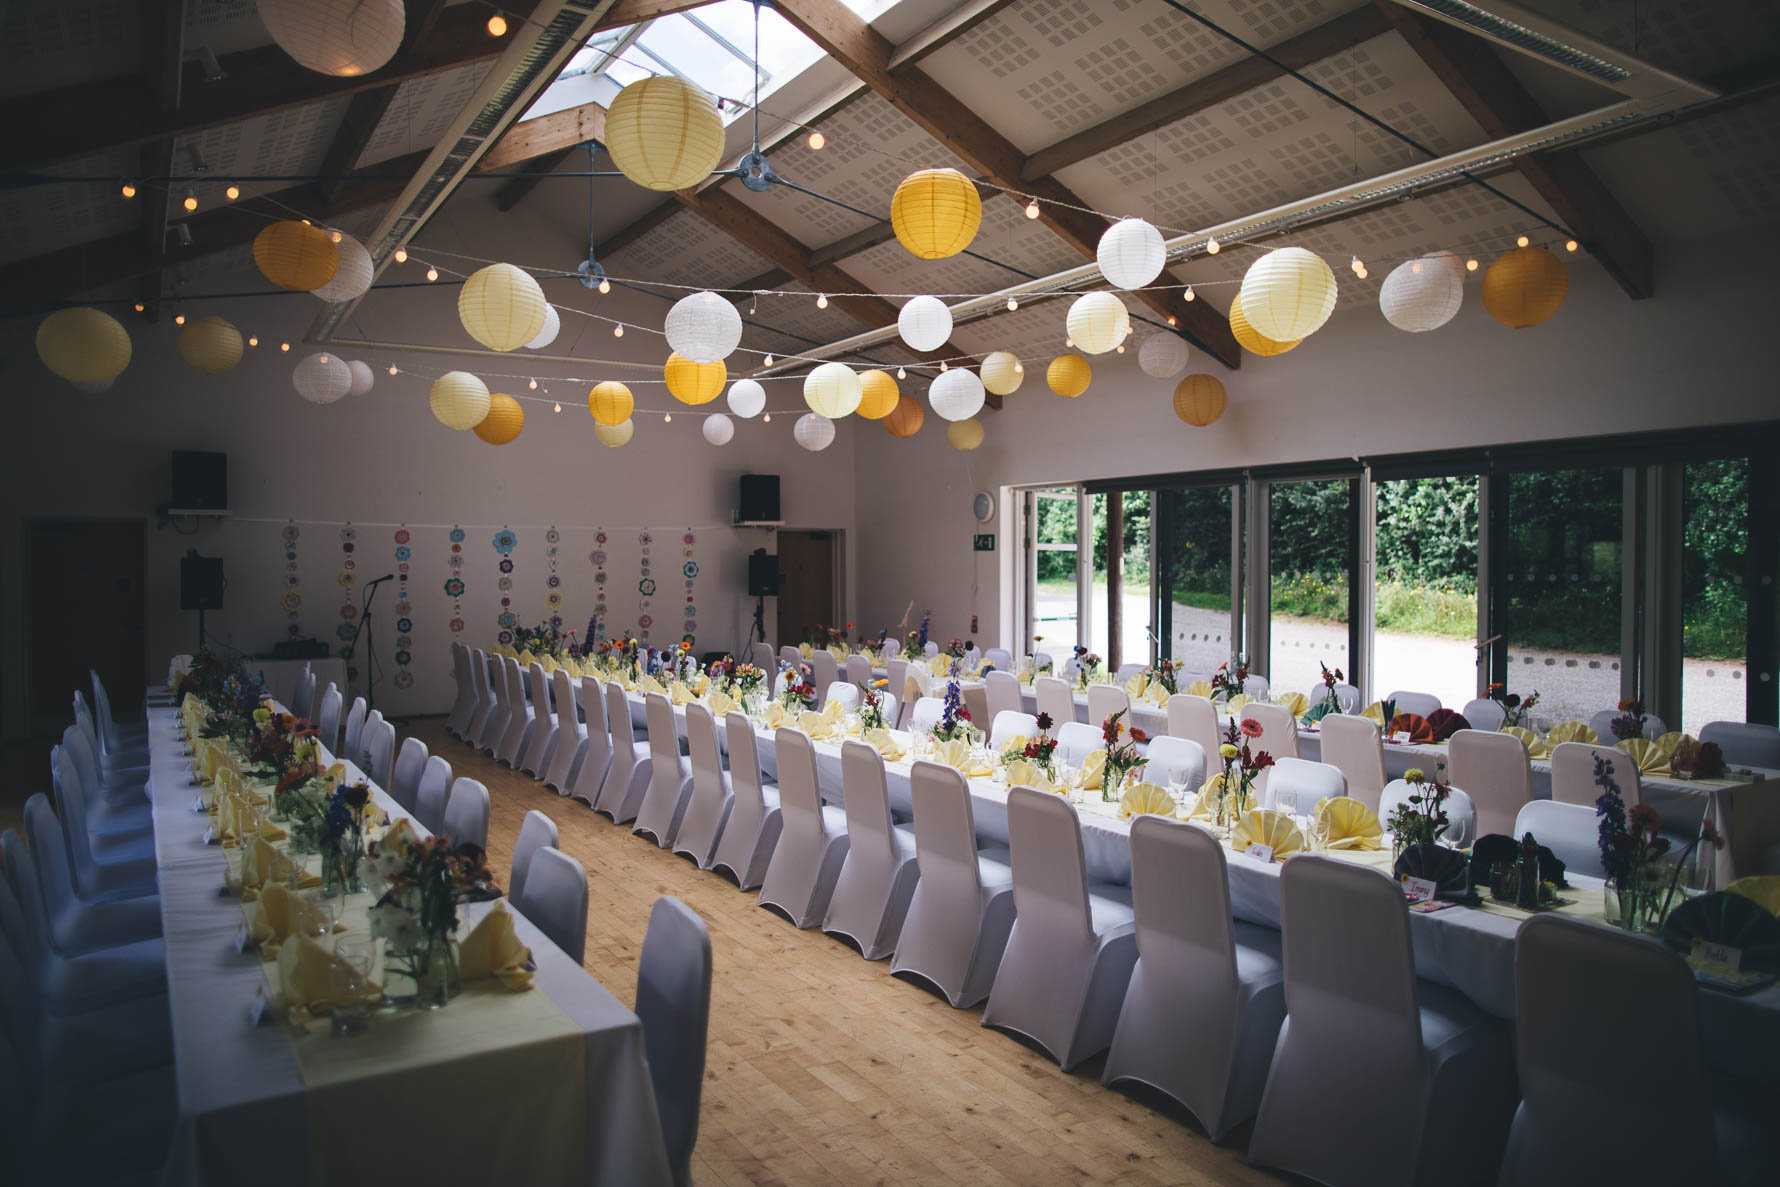 Village hall in Devon decorated for a wedding reception with white chair coverings and long white tables with floral arrangements along the tables. There are white and yellow paper lanterns hung from the beams across the room.